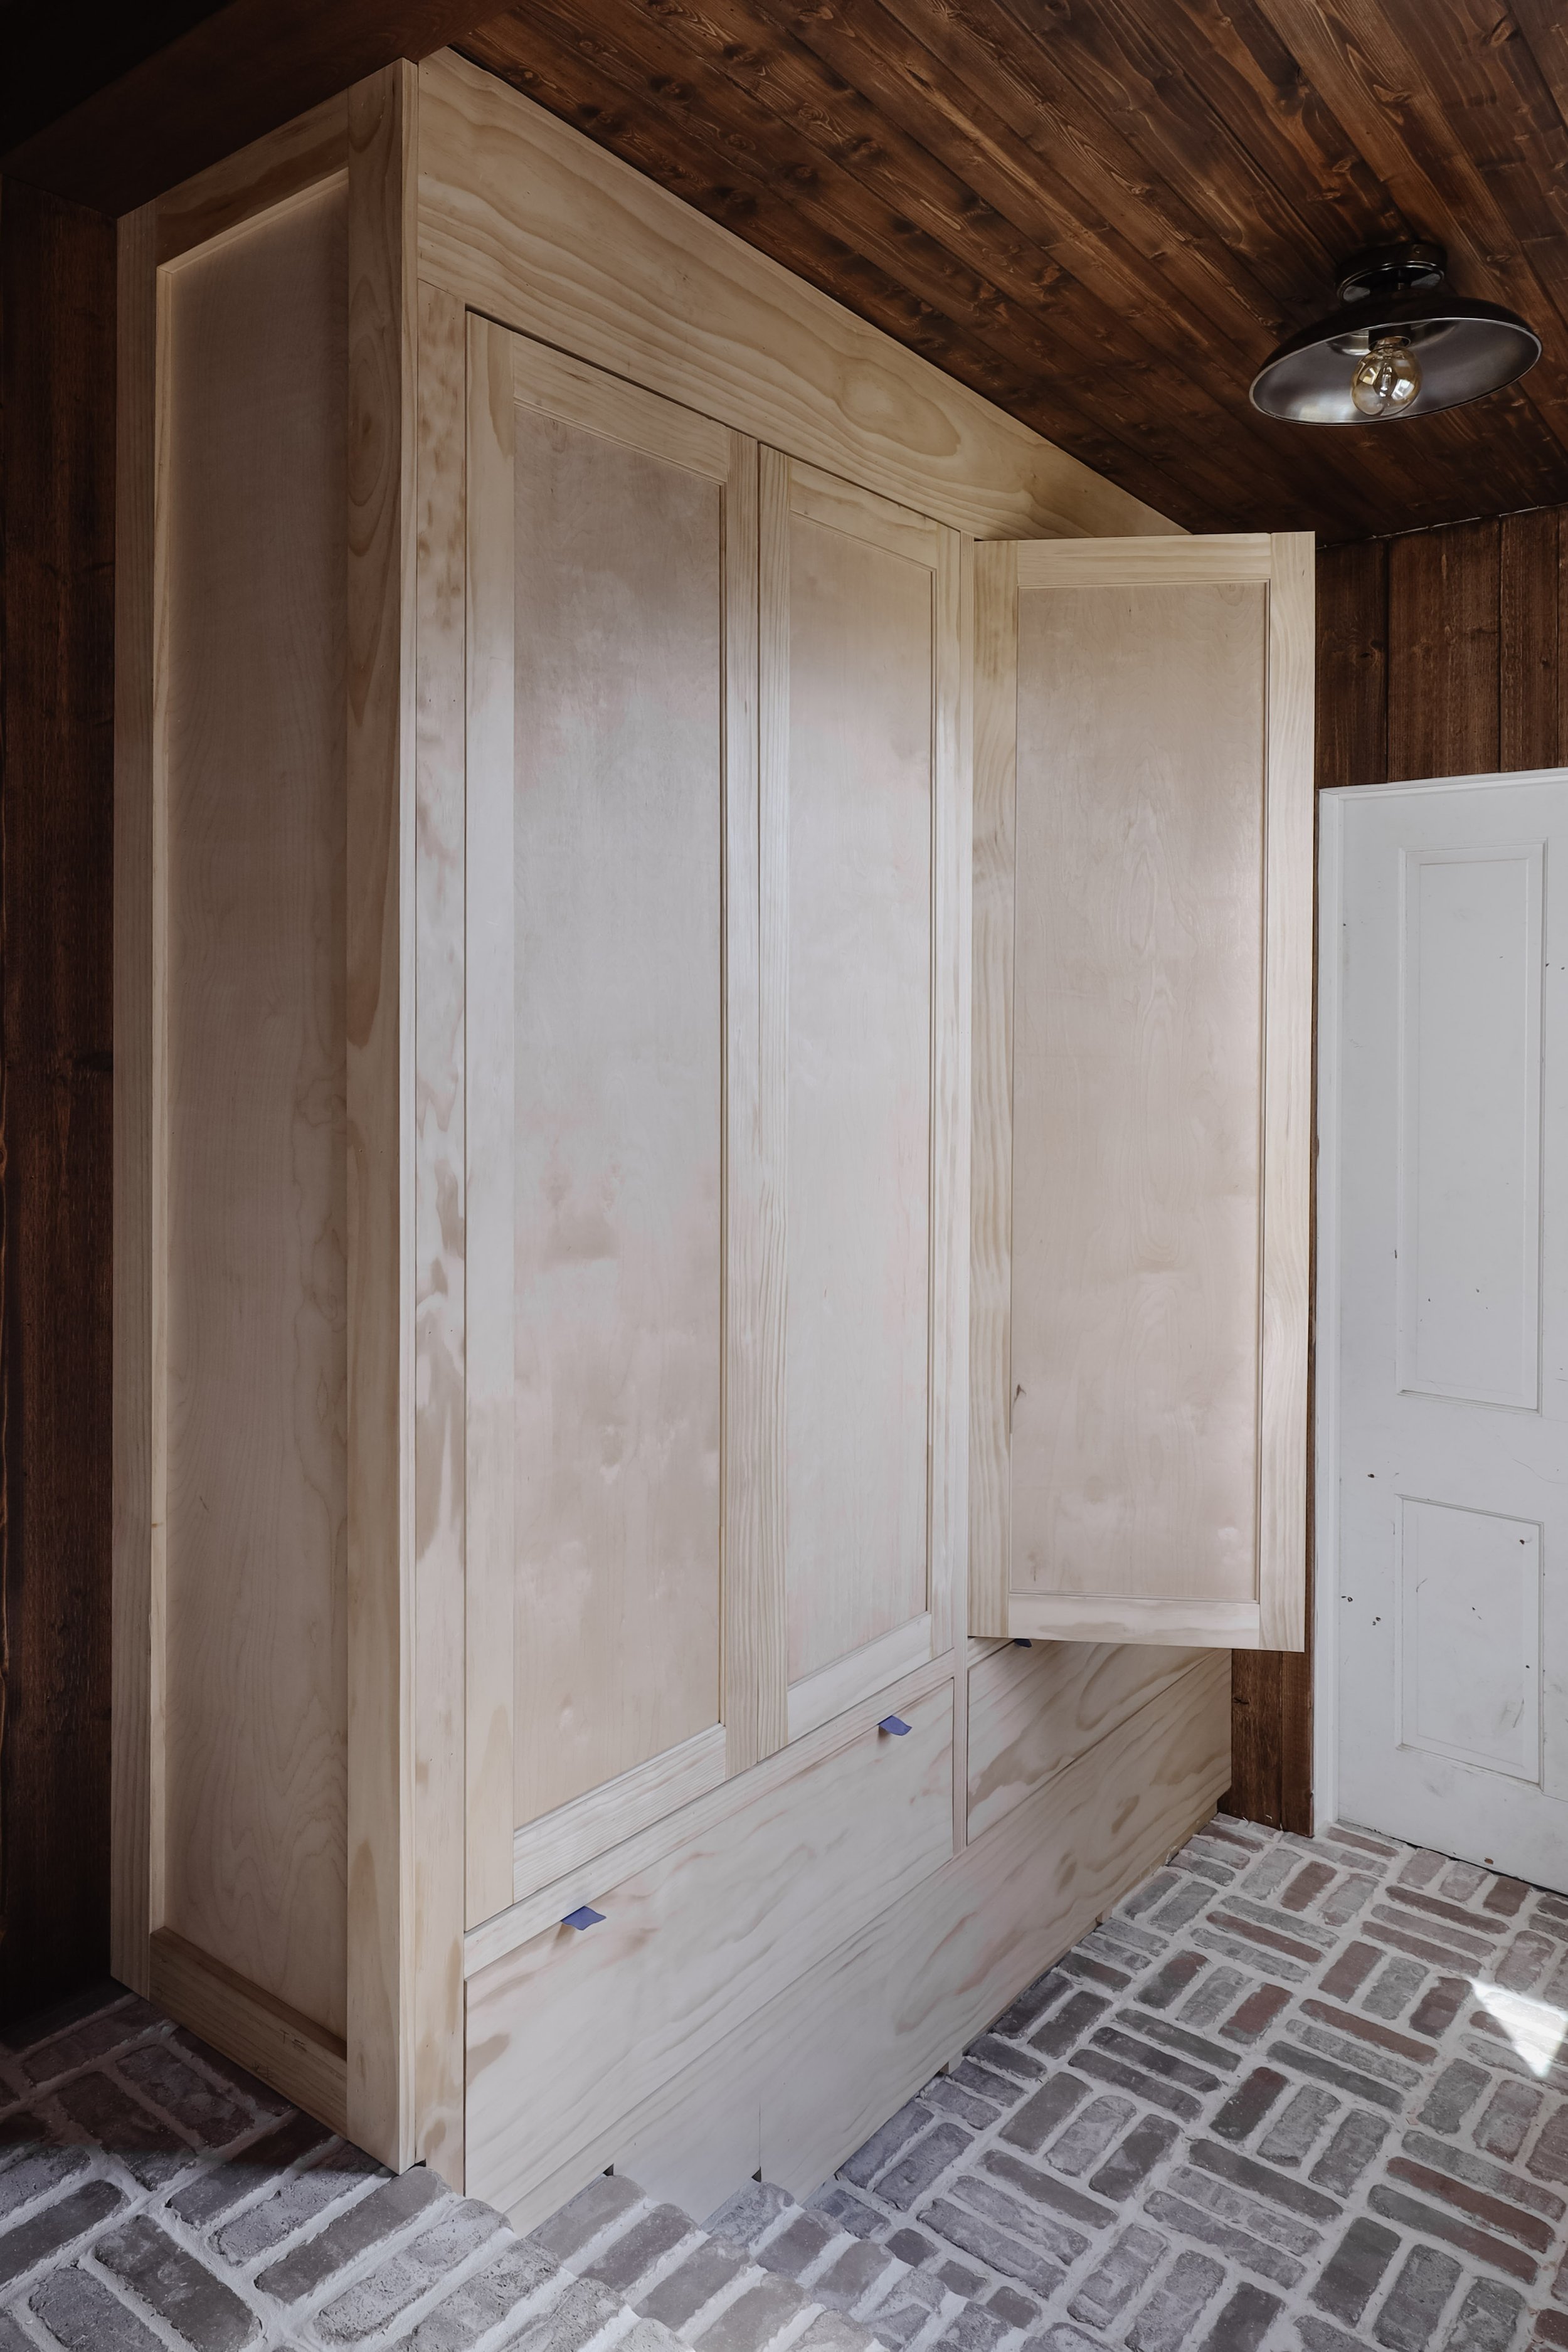 How to build shaker cabinet doors. DIY wood shaker cabinet doors. How to build inset cabinet doors from scratch. DIY tall coat closet and mudroom closet doors | Nadine Stay